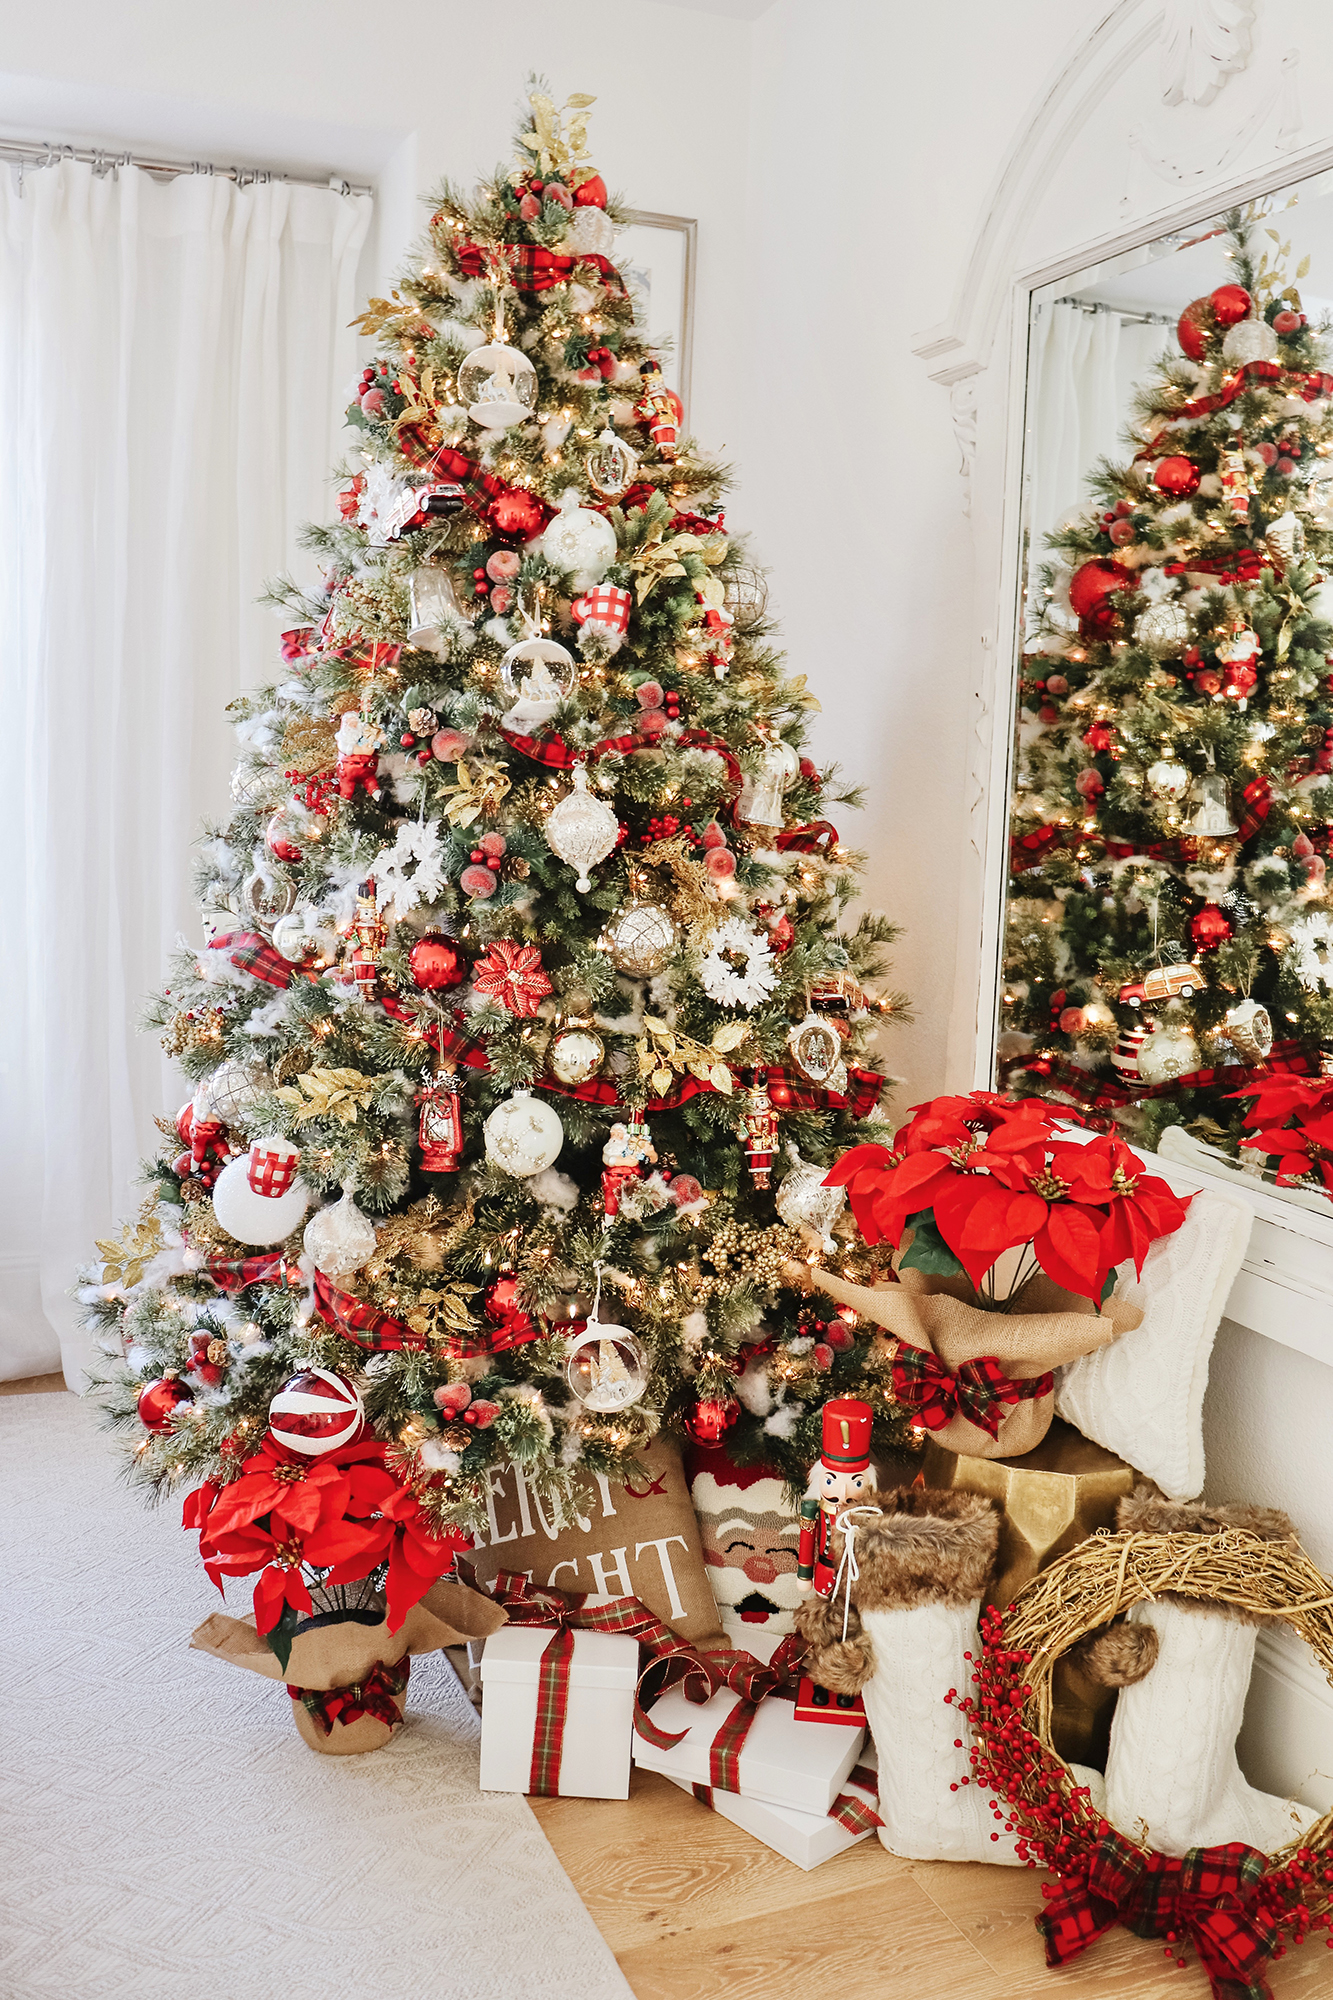 Red & White New England Style Christmas Tree - Traditional yet modern with pops of red, white and gold. Affordable and elegant for 2019 holiday decor